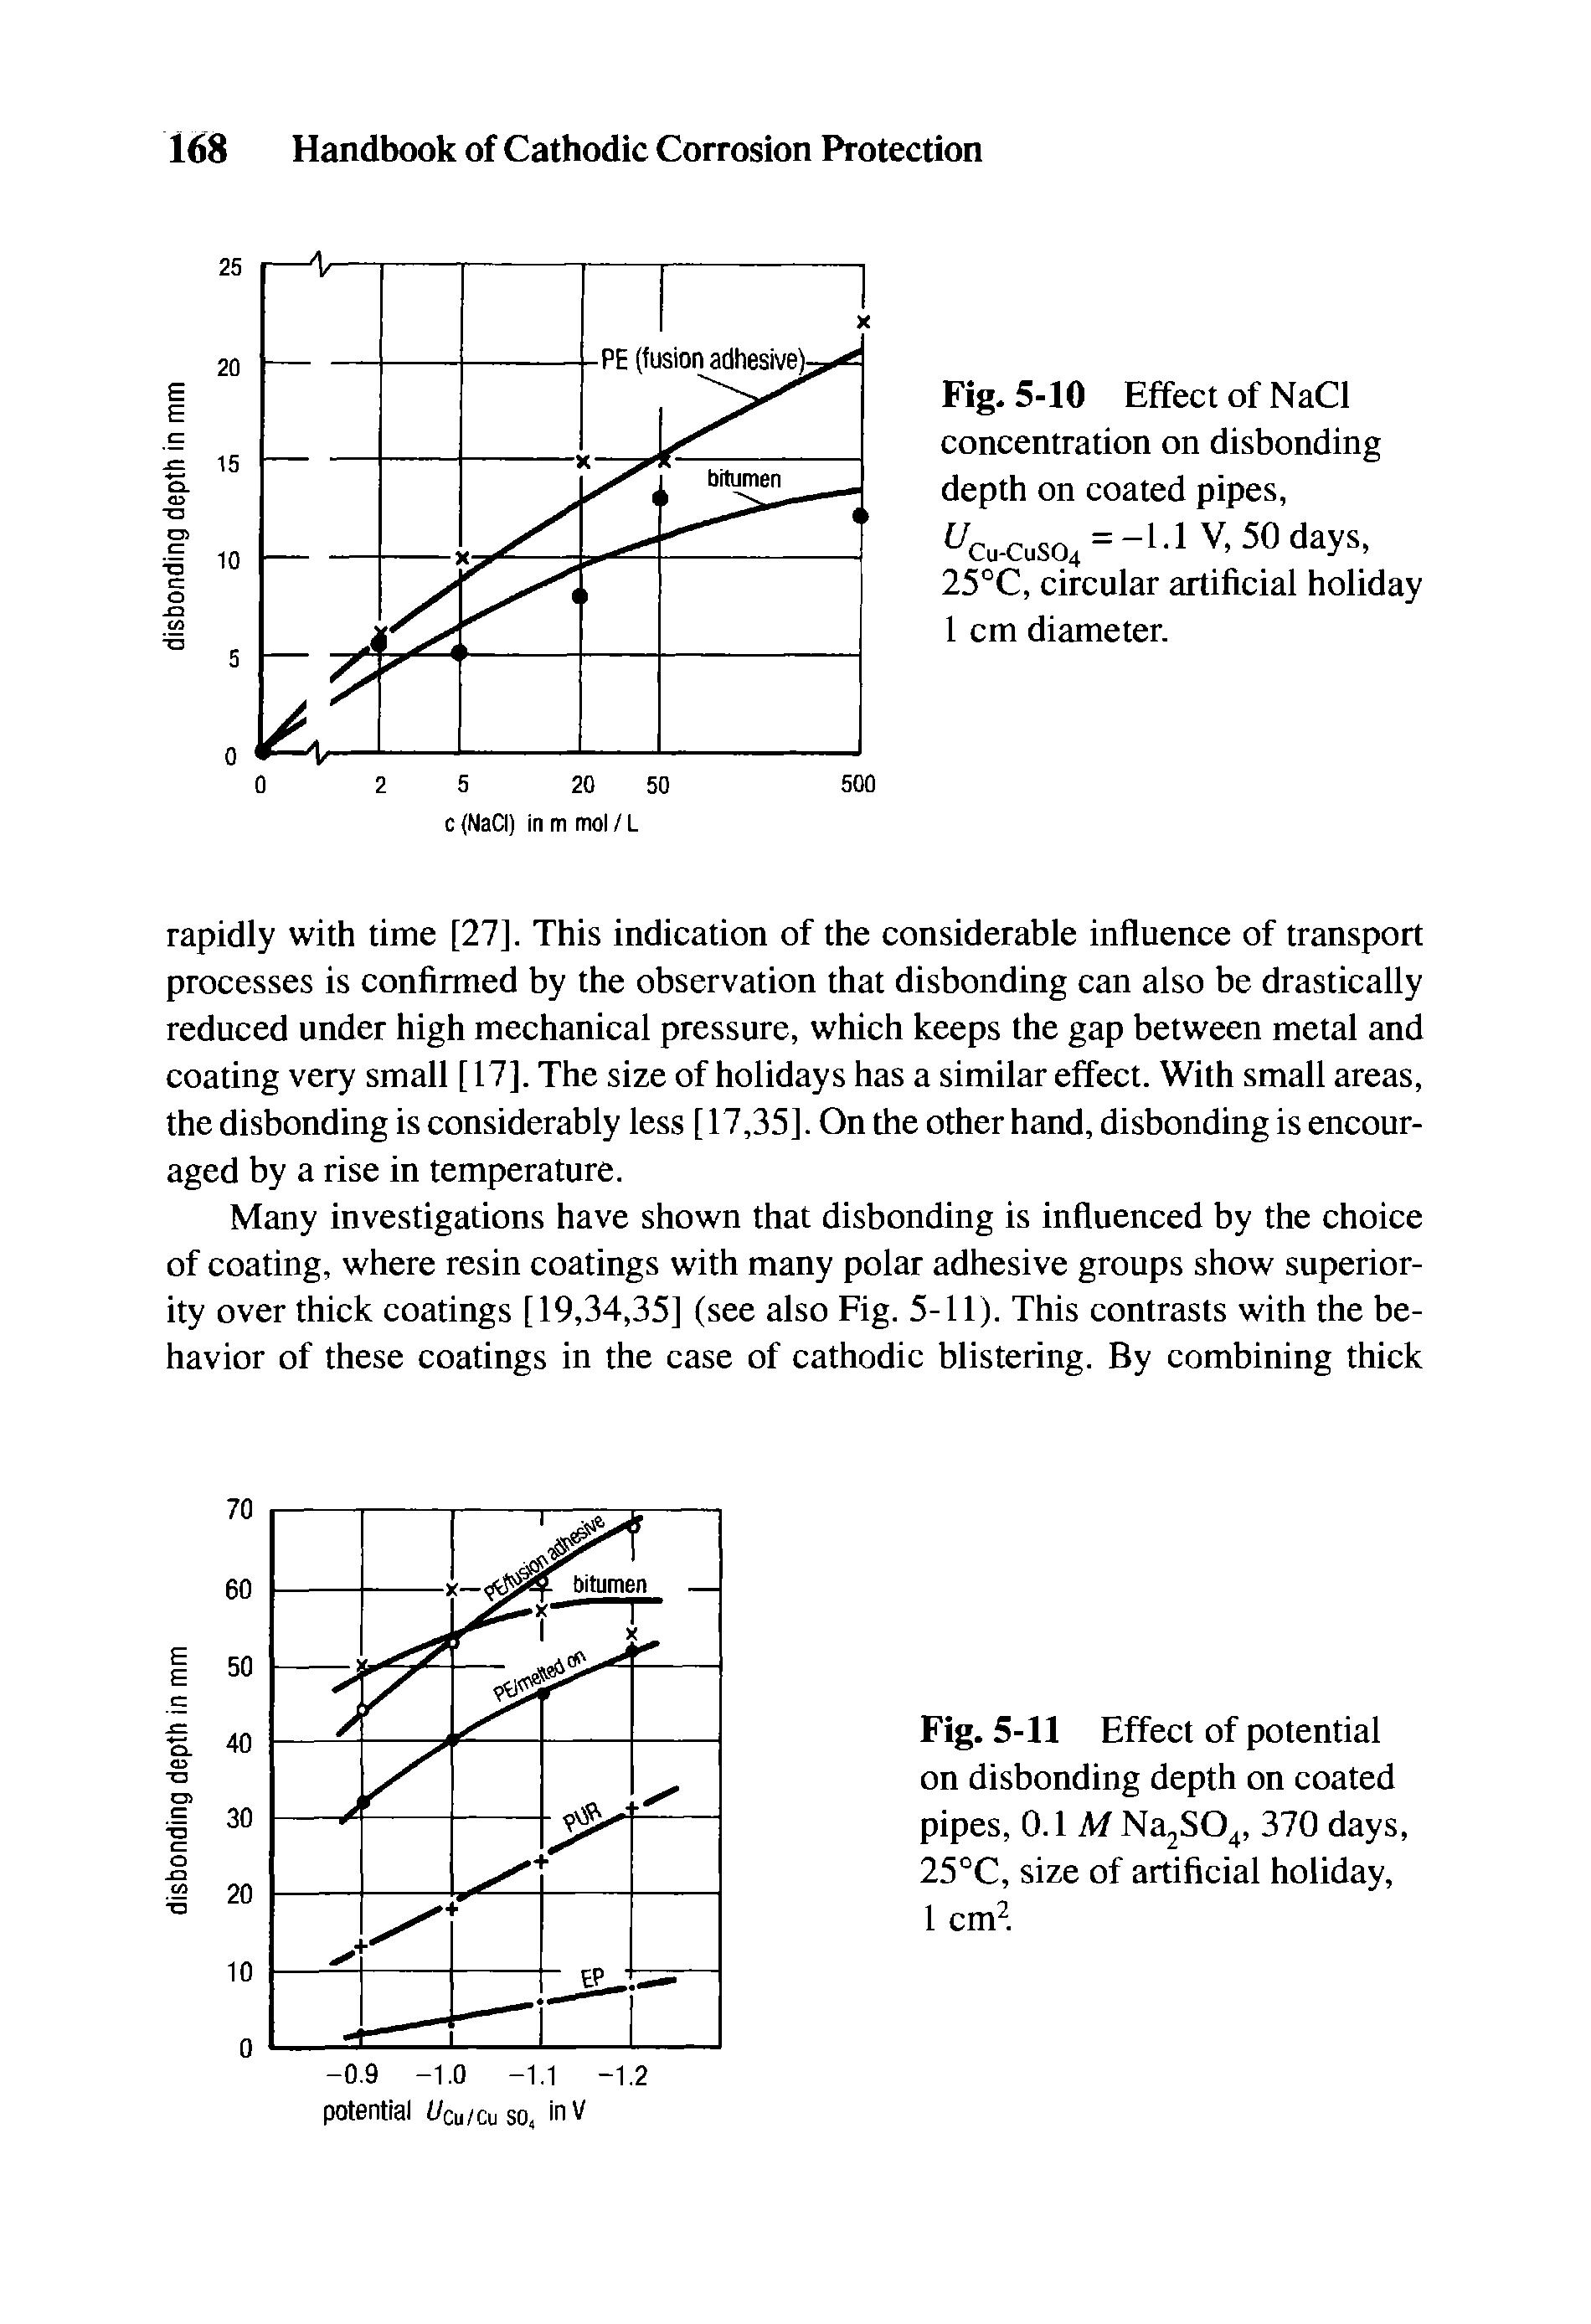 Fig. 5-10 Effect of NaCl concentration on disbonding depth on coated pipes,...